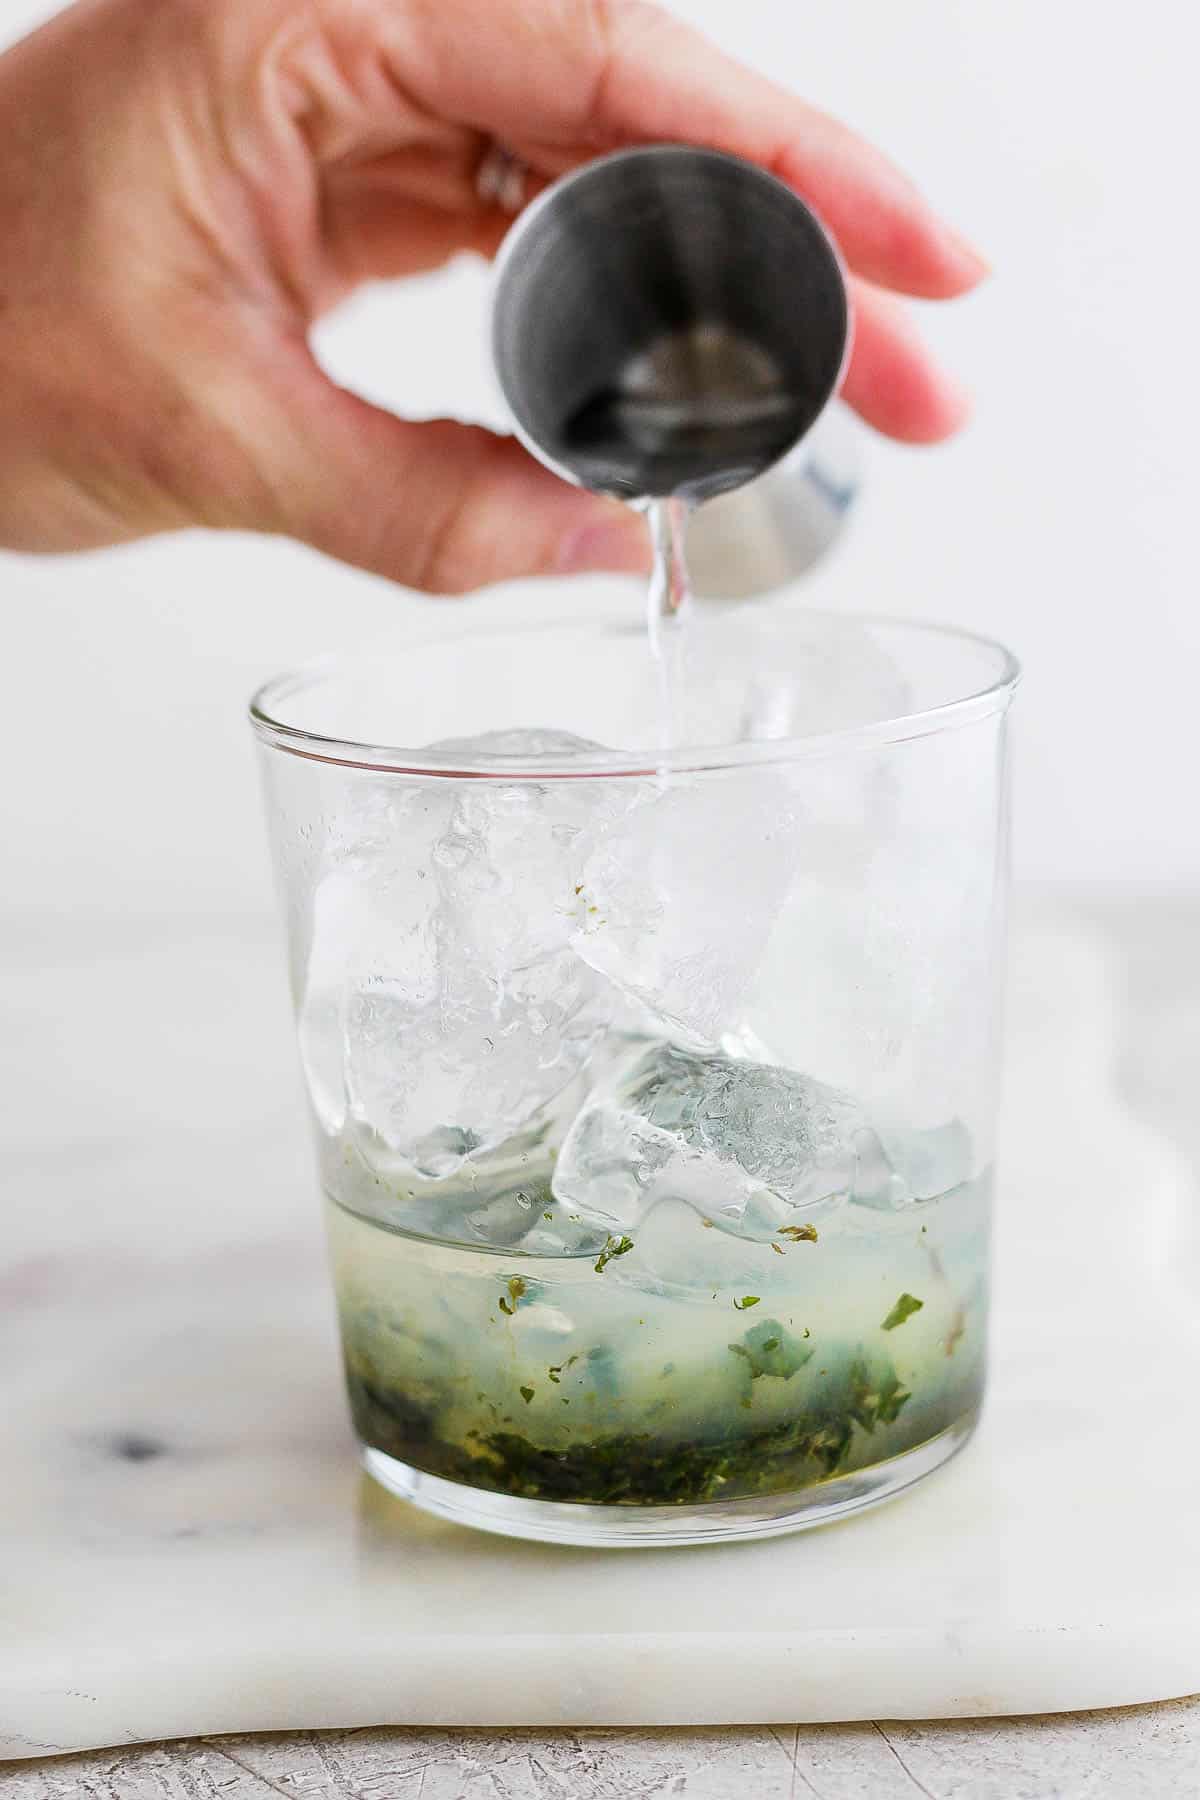 White rum being poured over ice in the glass with the muddled mint.